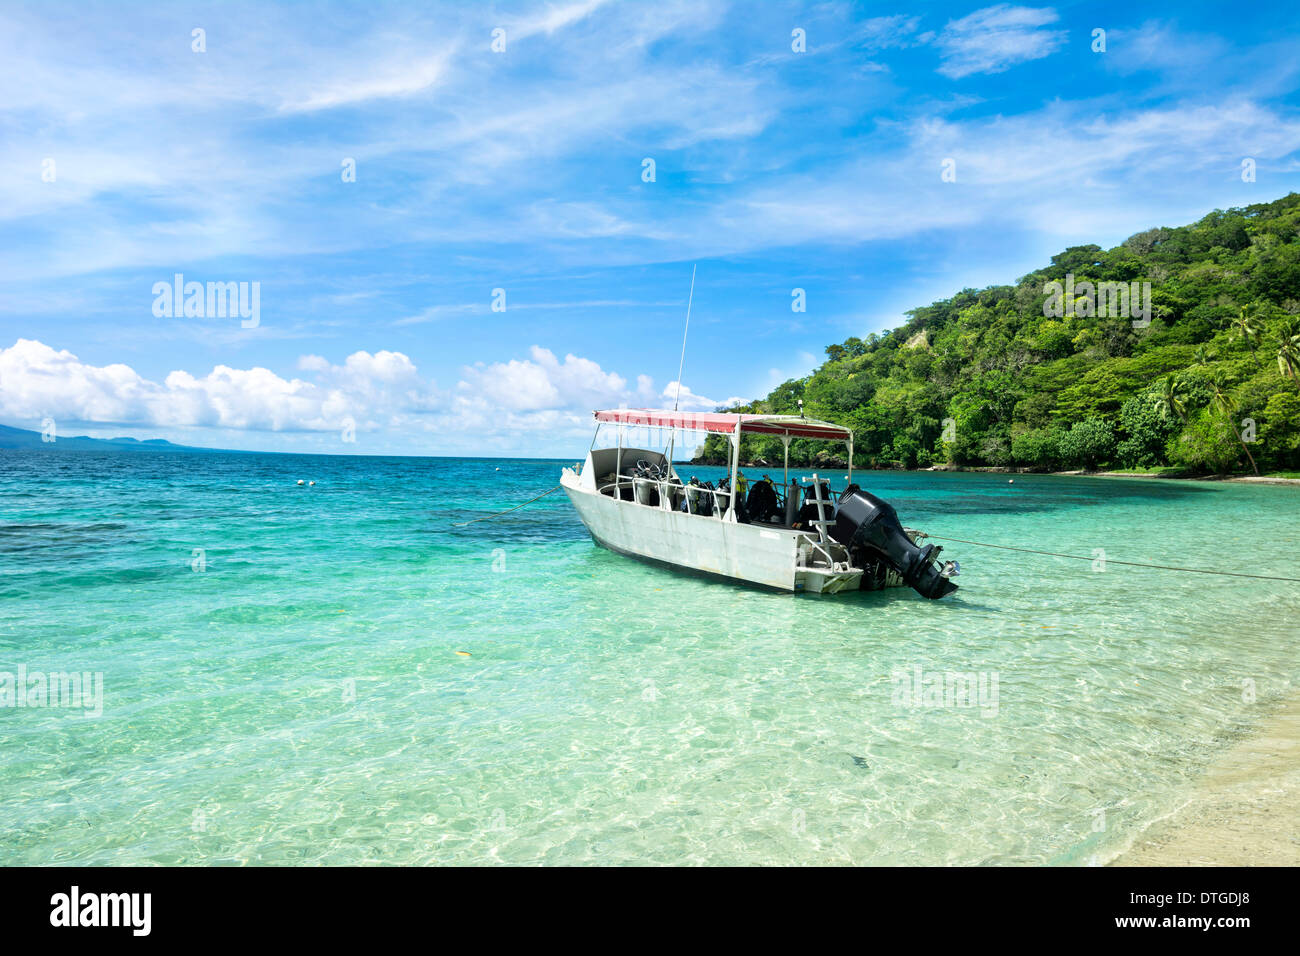 A scuba diving boat anchored in a beautiful tropical bay of turquoise water and a bright, blue vibrant sky with patchy clouds. Stock Photo